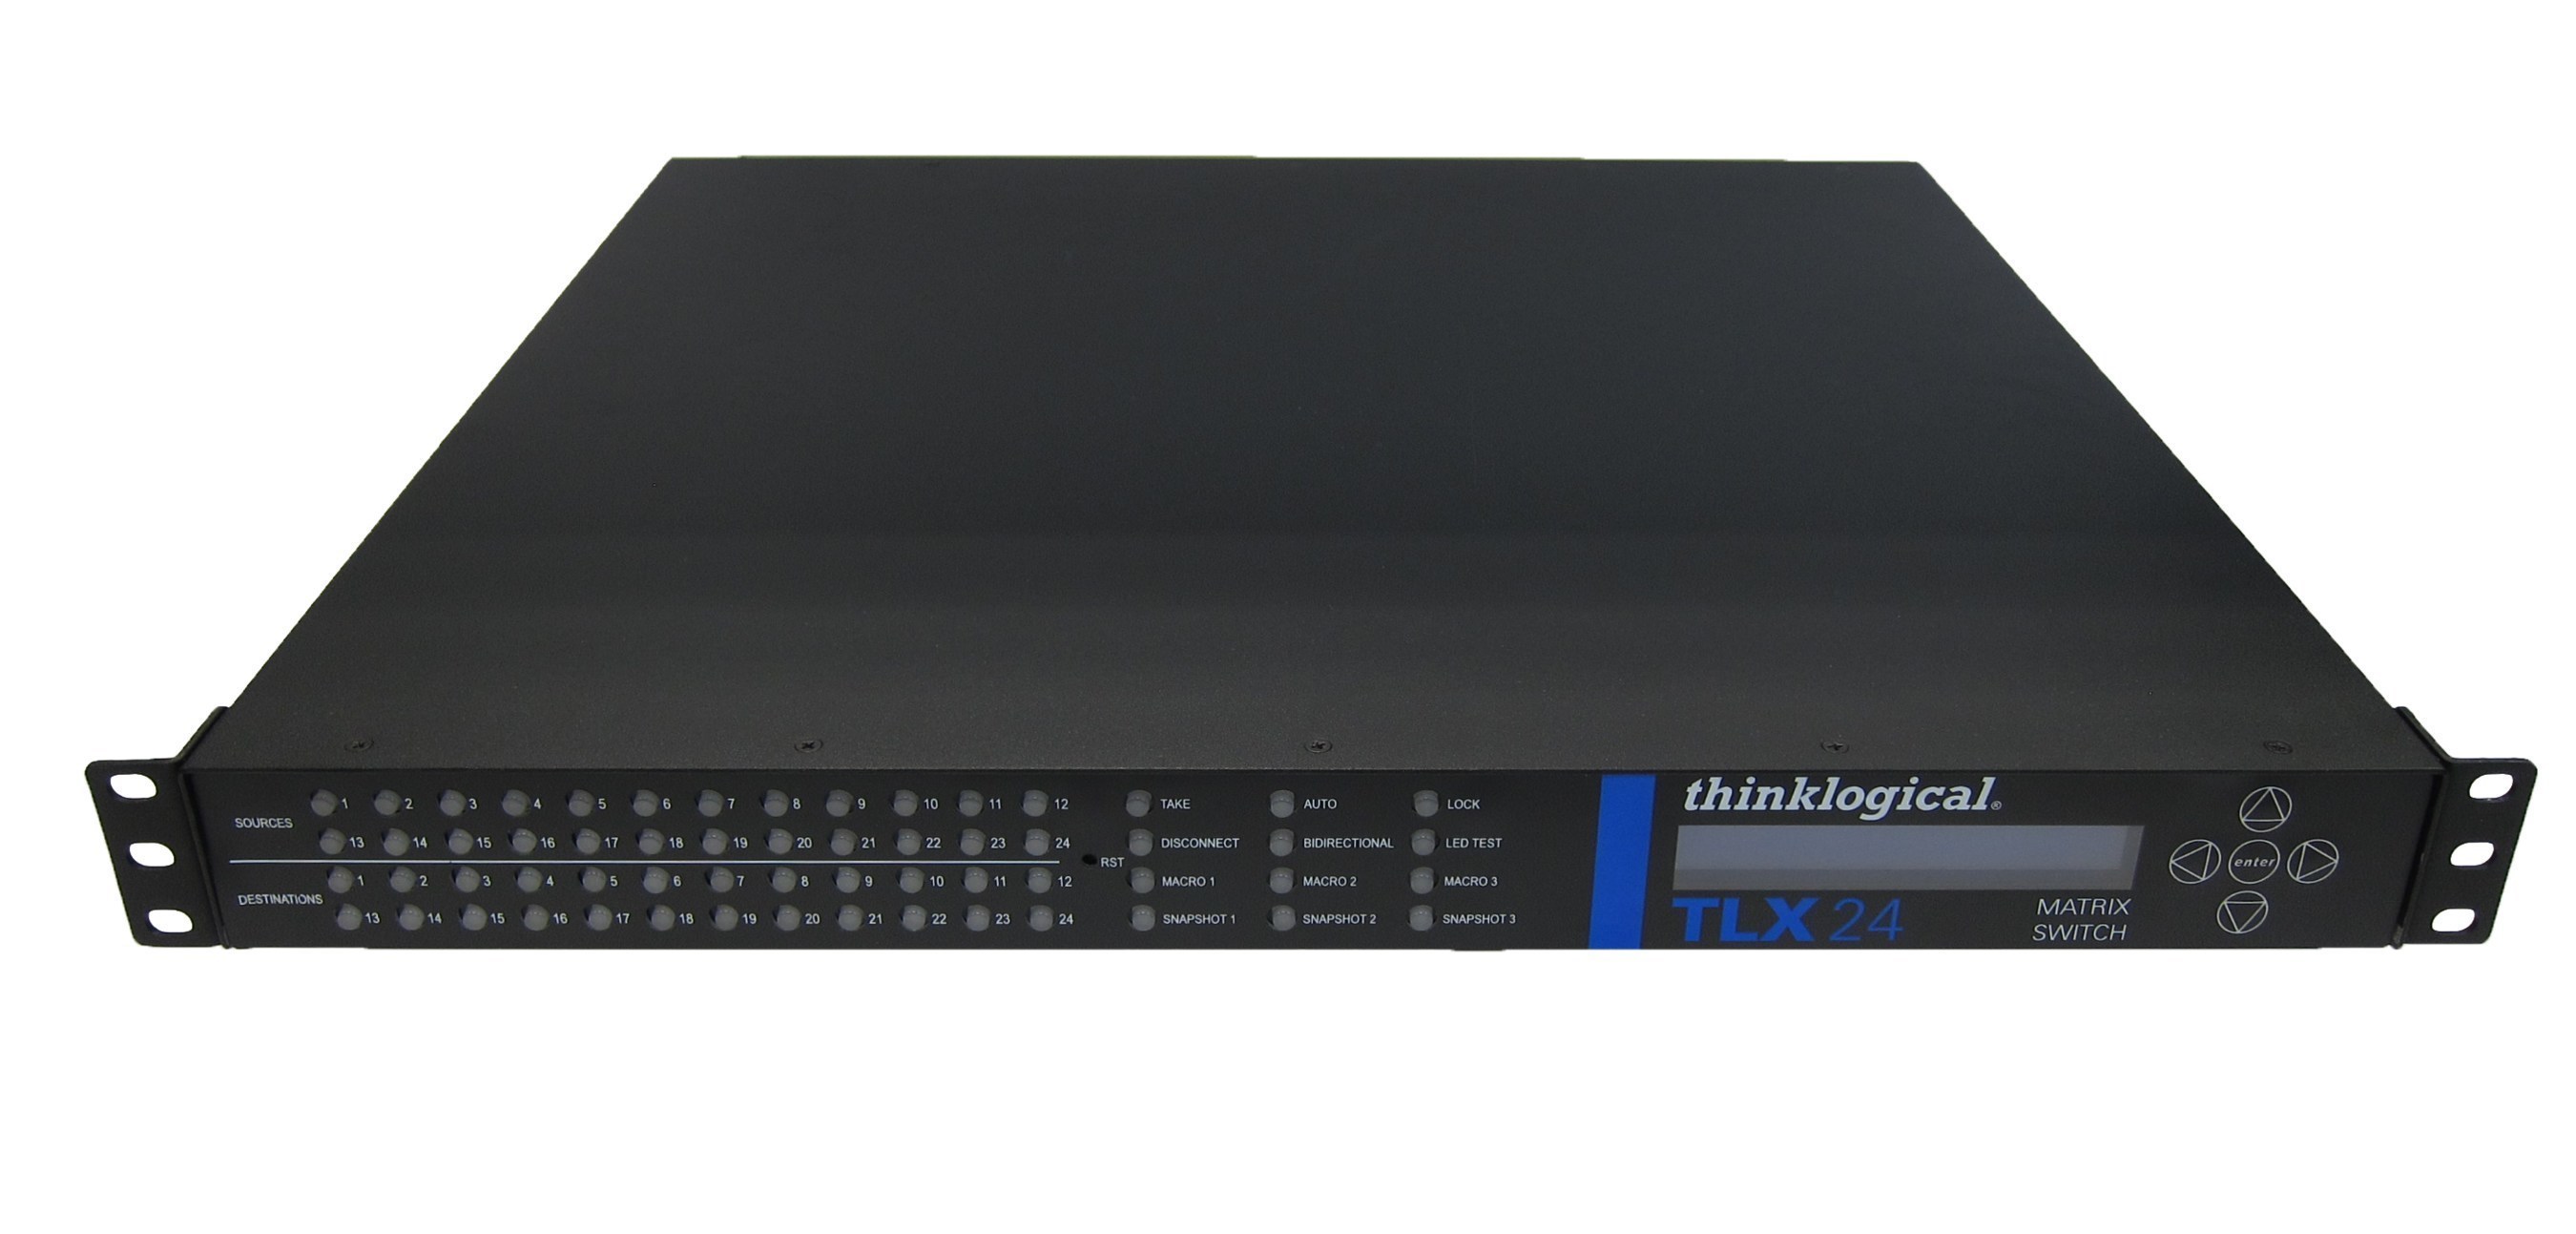 The TLX24 from Thinklogical offers a compact, high performance, non-blocking, 24-port matrix switch for complete, end-to-end routing of video and computer peripheral signals. The TLX24 delivers a 100 percent uncompressed, 10Gbps signal path with the lowest signal latency in the industry. When combined with TLX extenders, the TLX24 offers precise pixel-for-pixel transmission and switching of UHD, HDR and 4K DCI resolution video -- up to 4096 x 2160 resolution, 60Hz frame rate, 4:4:4 chroma subsampling and 30-bit per pixel color depth.